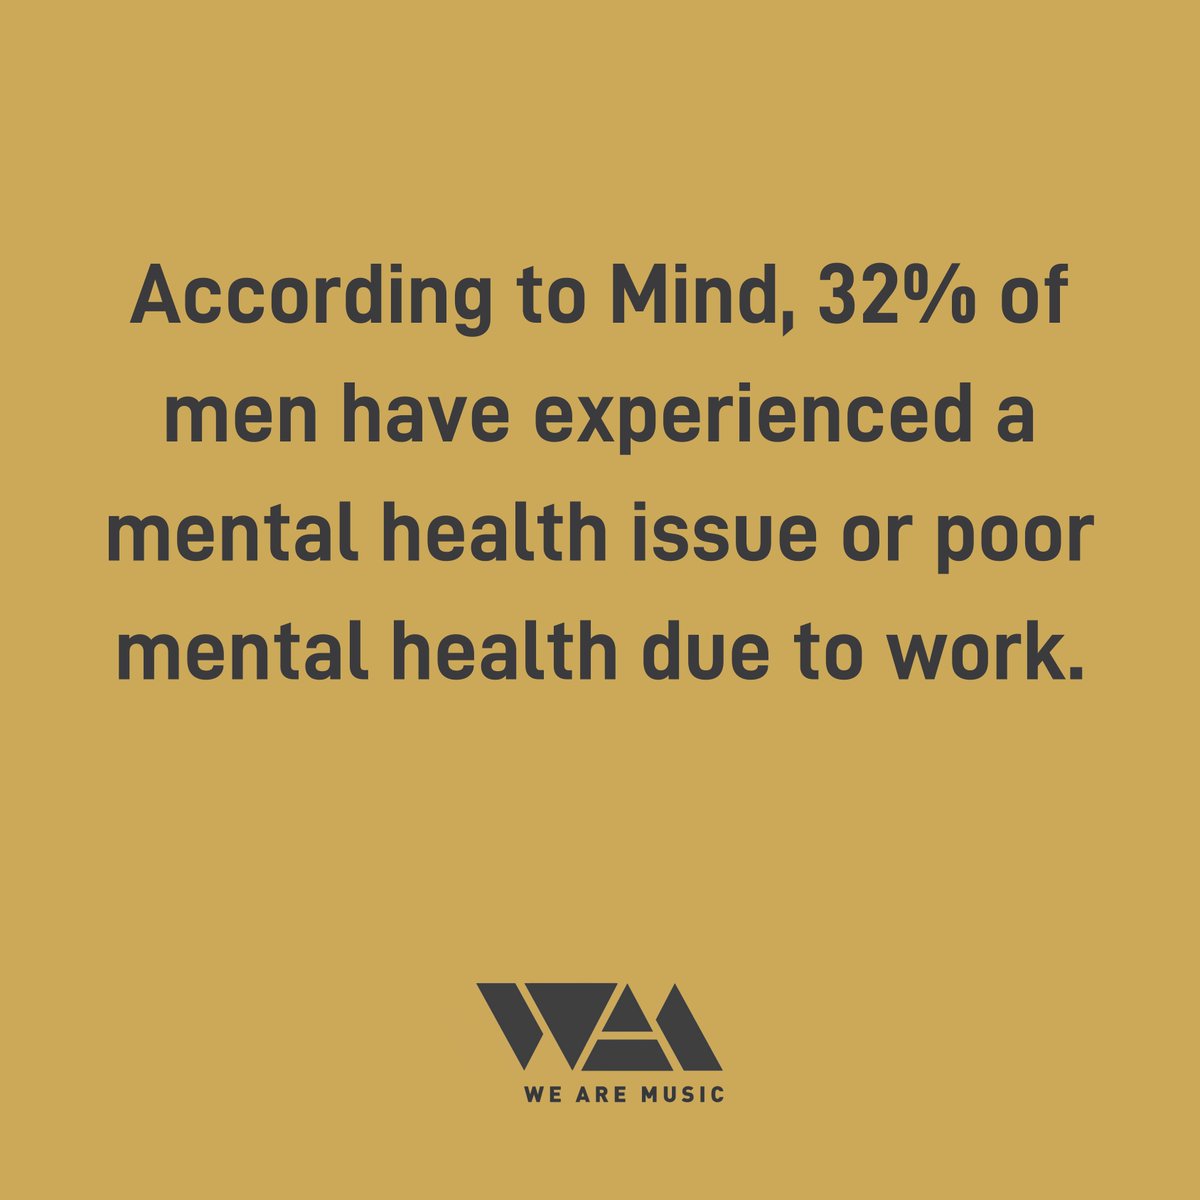 Did you know that 32% of men have experienced a mental health issue or poor mental health due to work? Let's work towards creating a safer and more supportive music industry for everyone. #MentalHealthAwareness #MusicIndustry